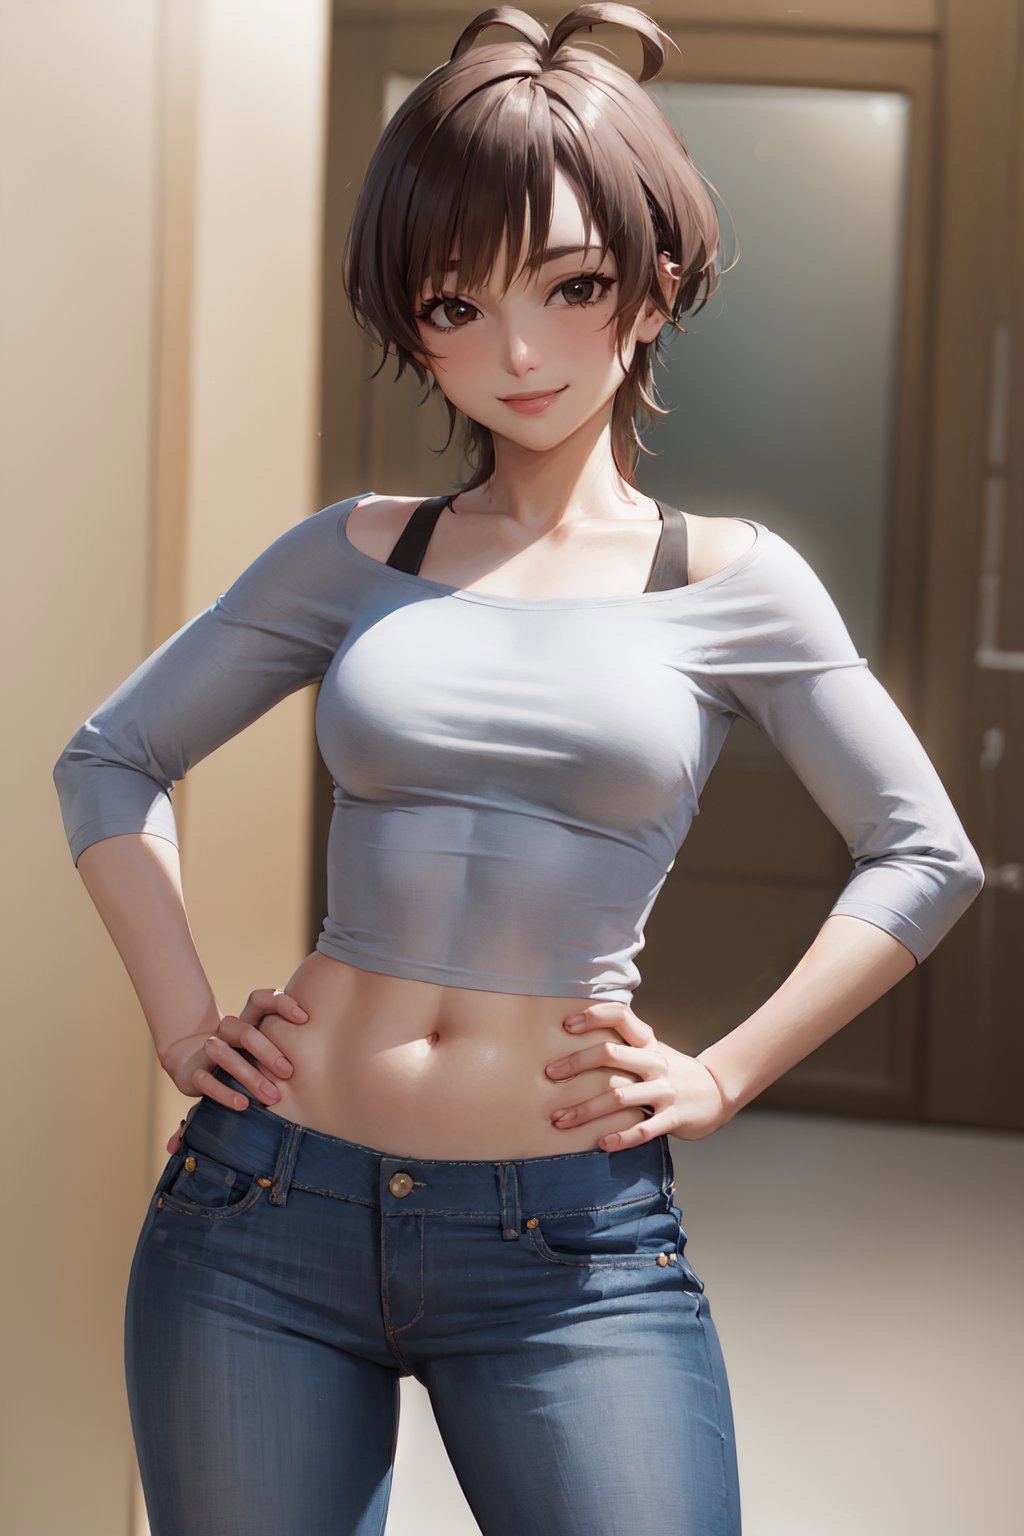 AI model image by justTNP